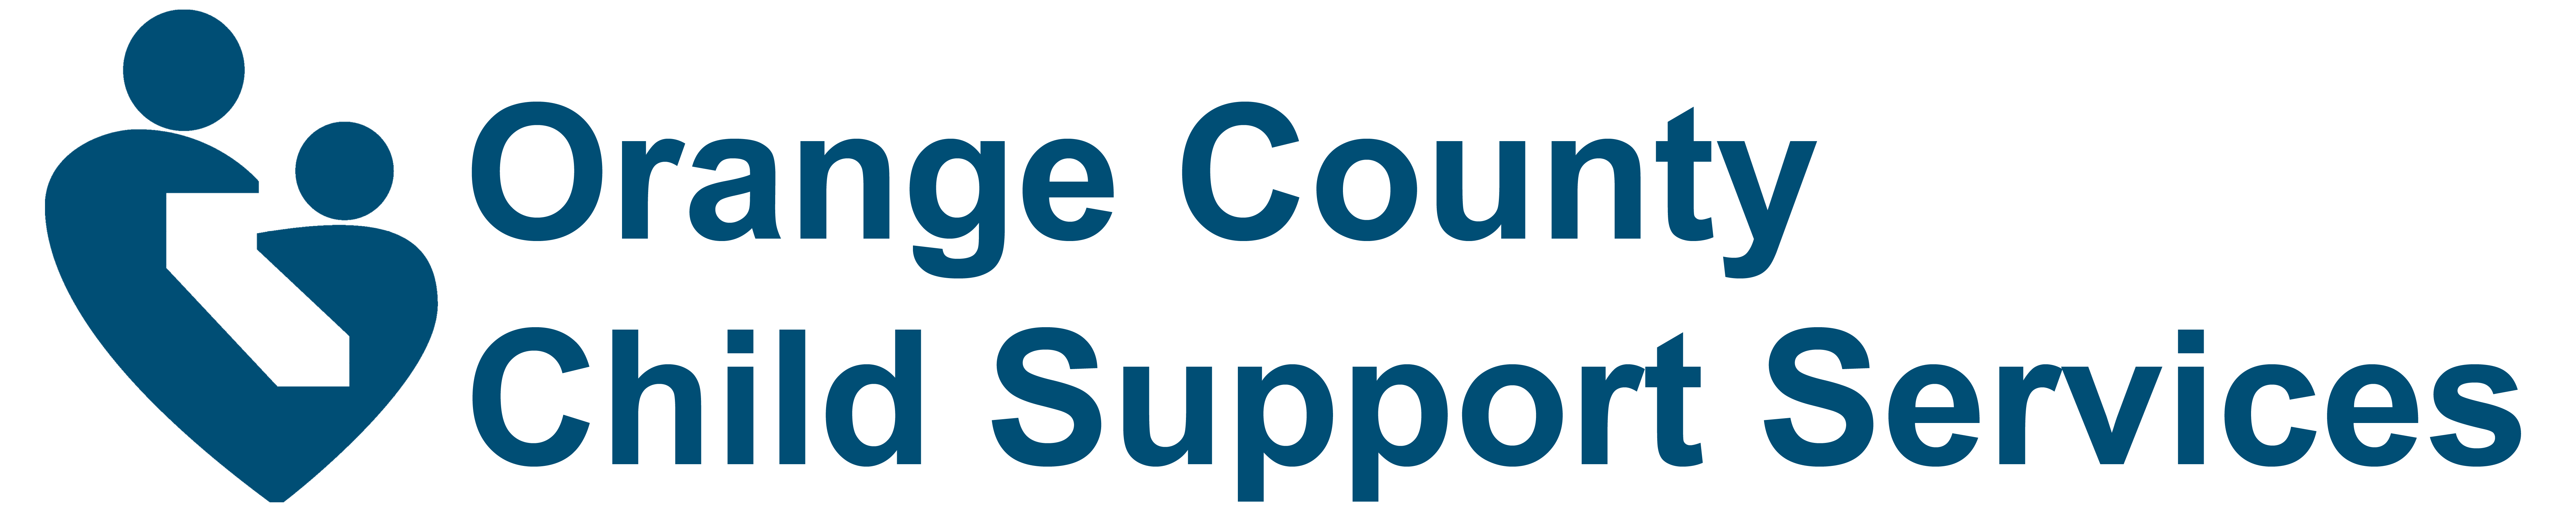 Orange County Child Support Services Logo -- Home